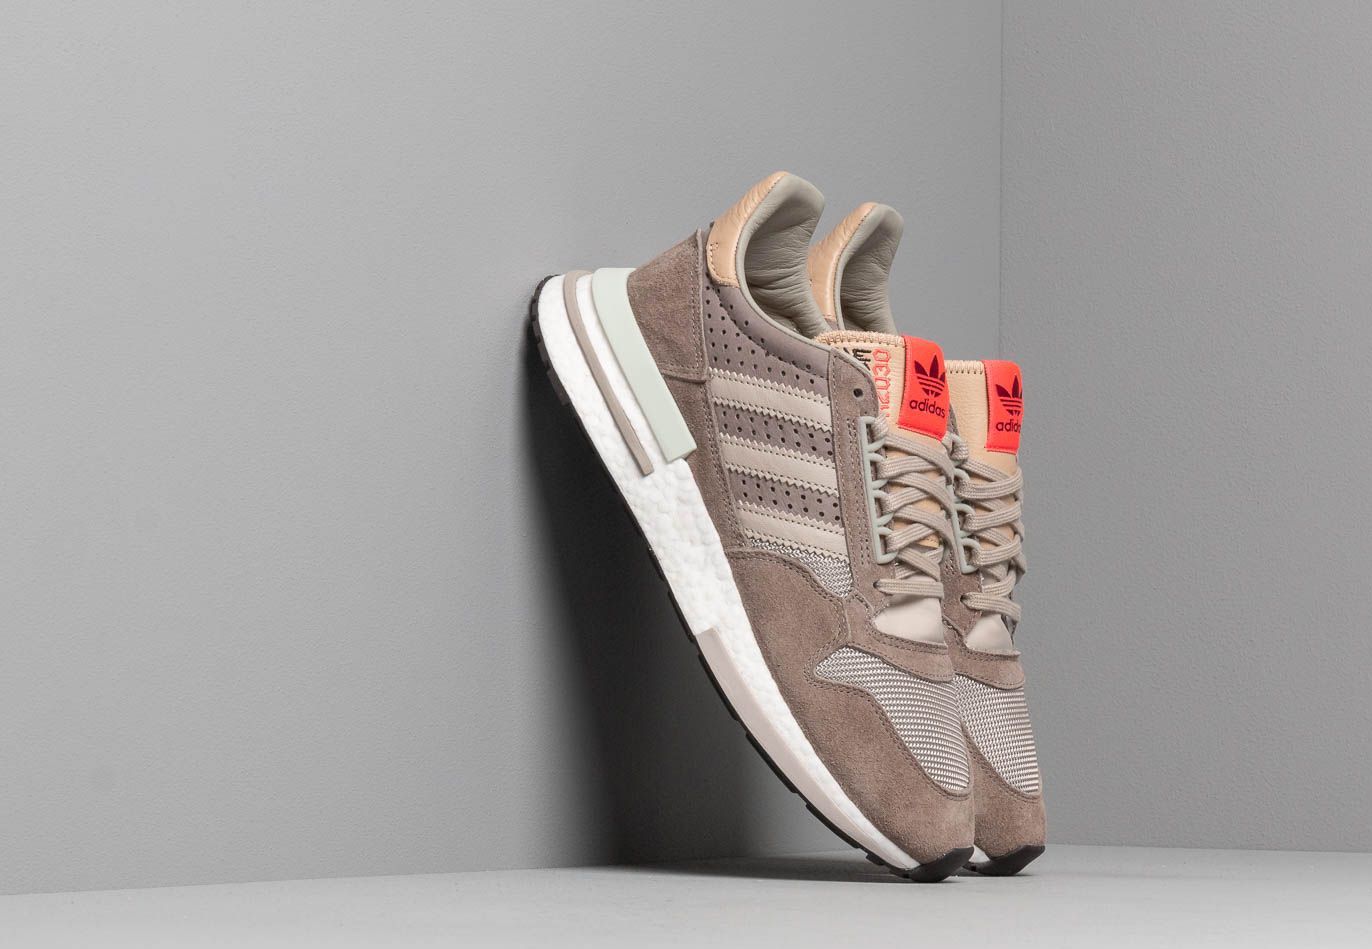 adidas ZX 500 RM Simple Brown/ Light Brown/ Ftw White BD7859